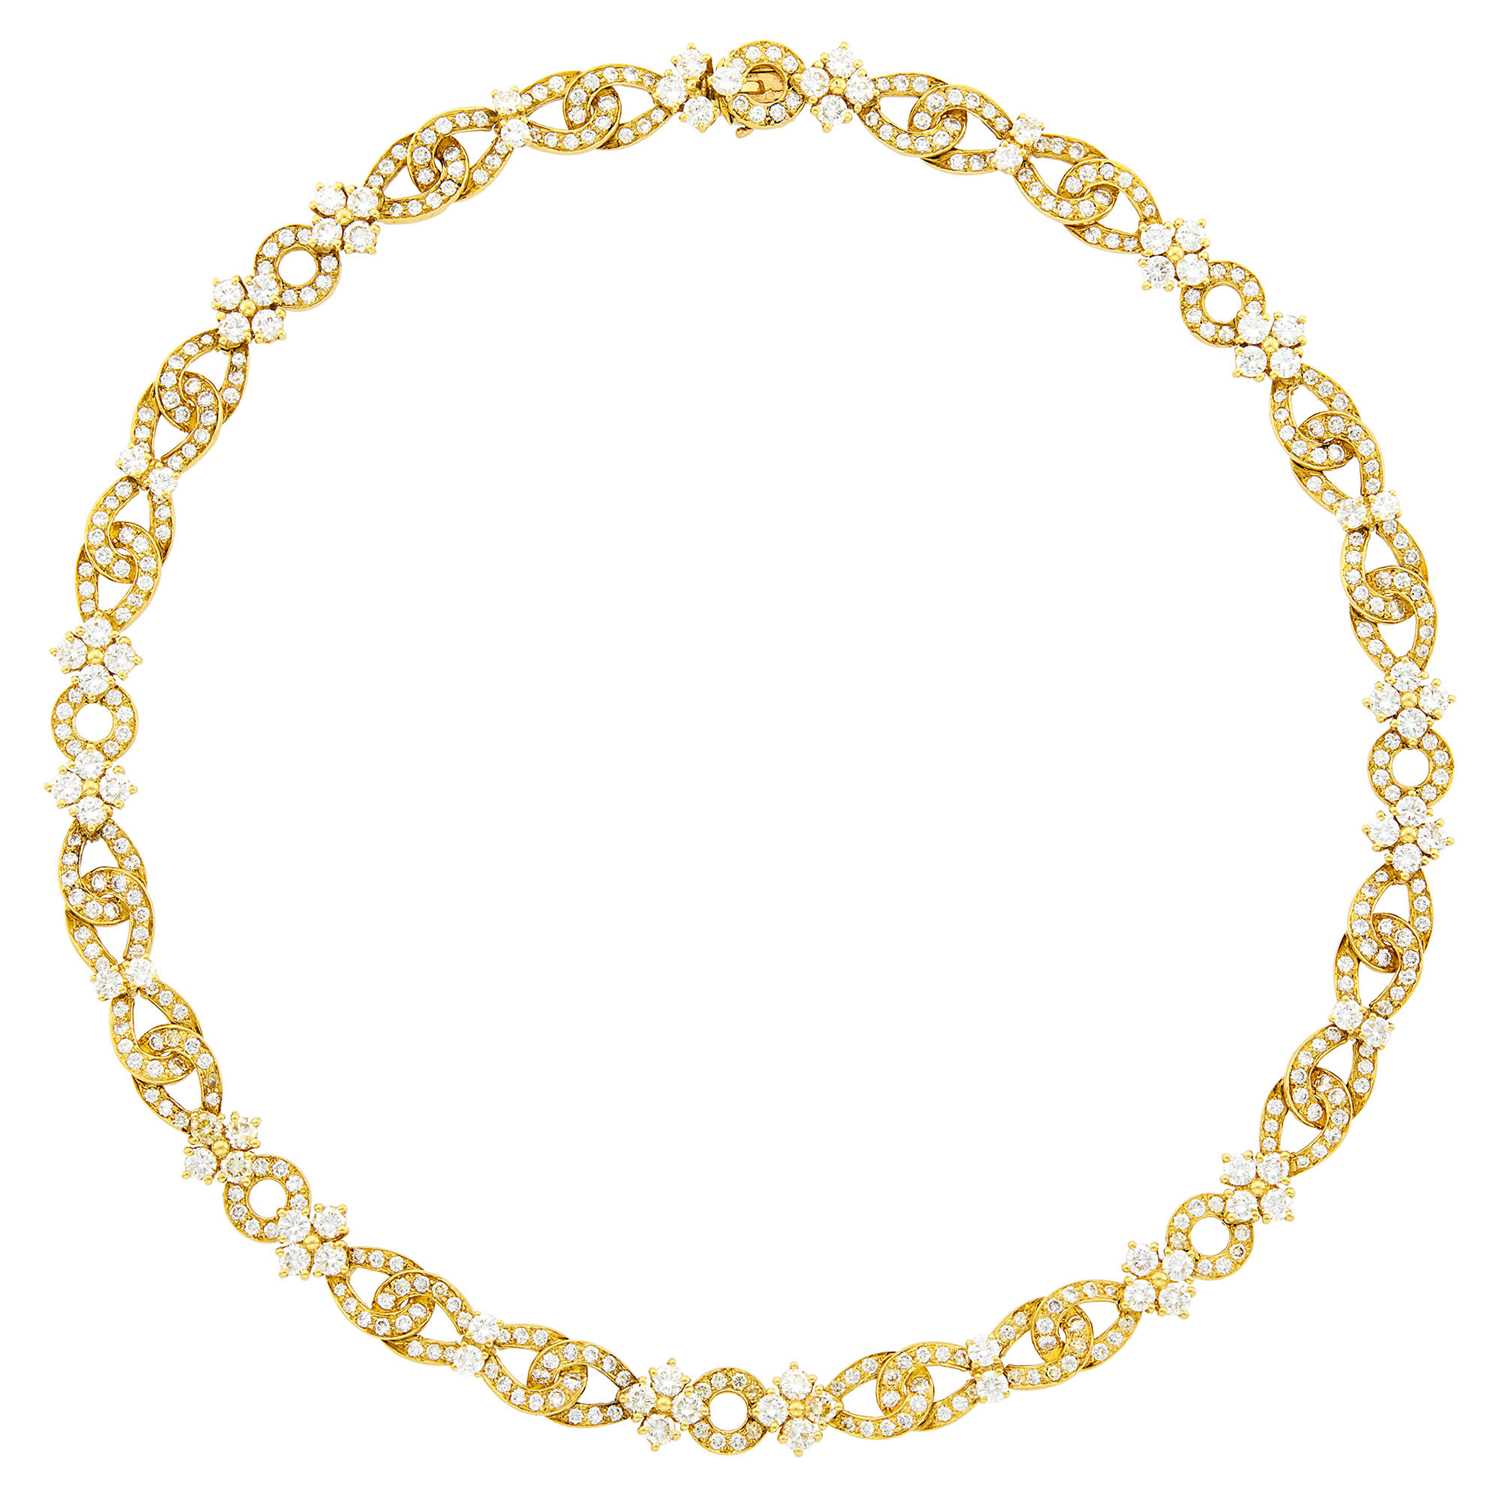 Lot 134 - Van Cleef & Arpels Gold and Diamond Necklace, France